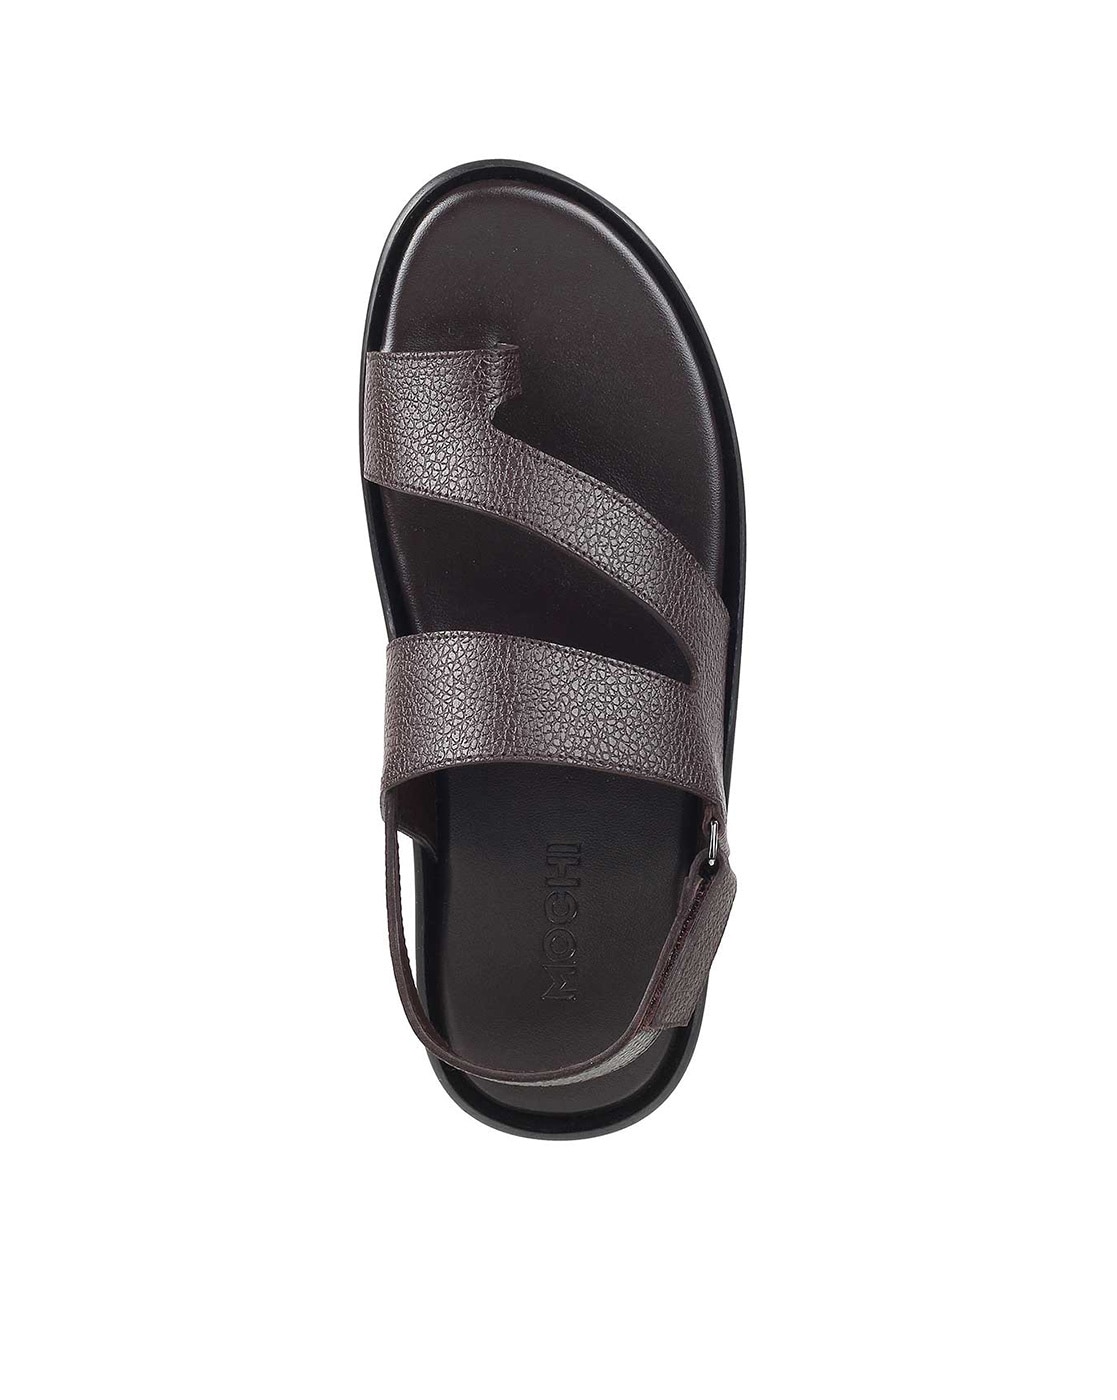 Mochi Men Brown Leather Sandals 5-UK (16-423-12-39) : Amazon.in: Fashion-hancorp34.com.vn